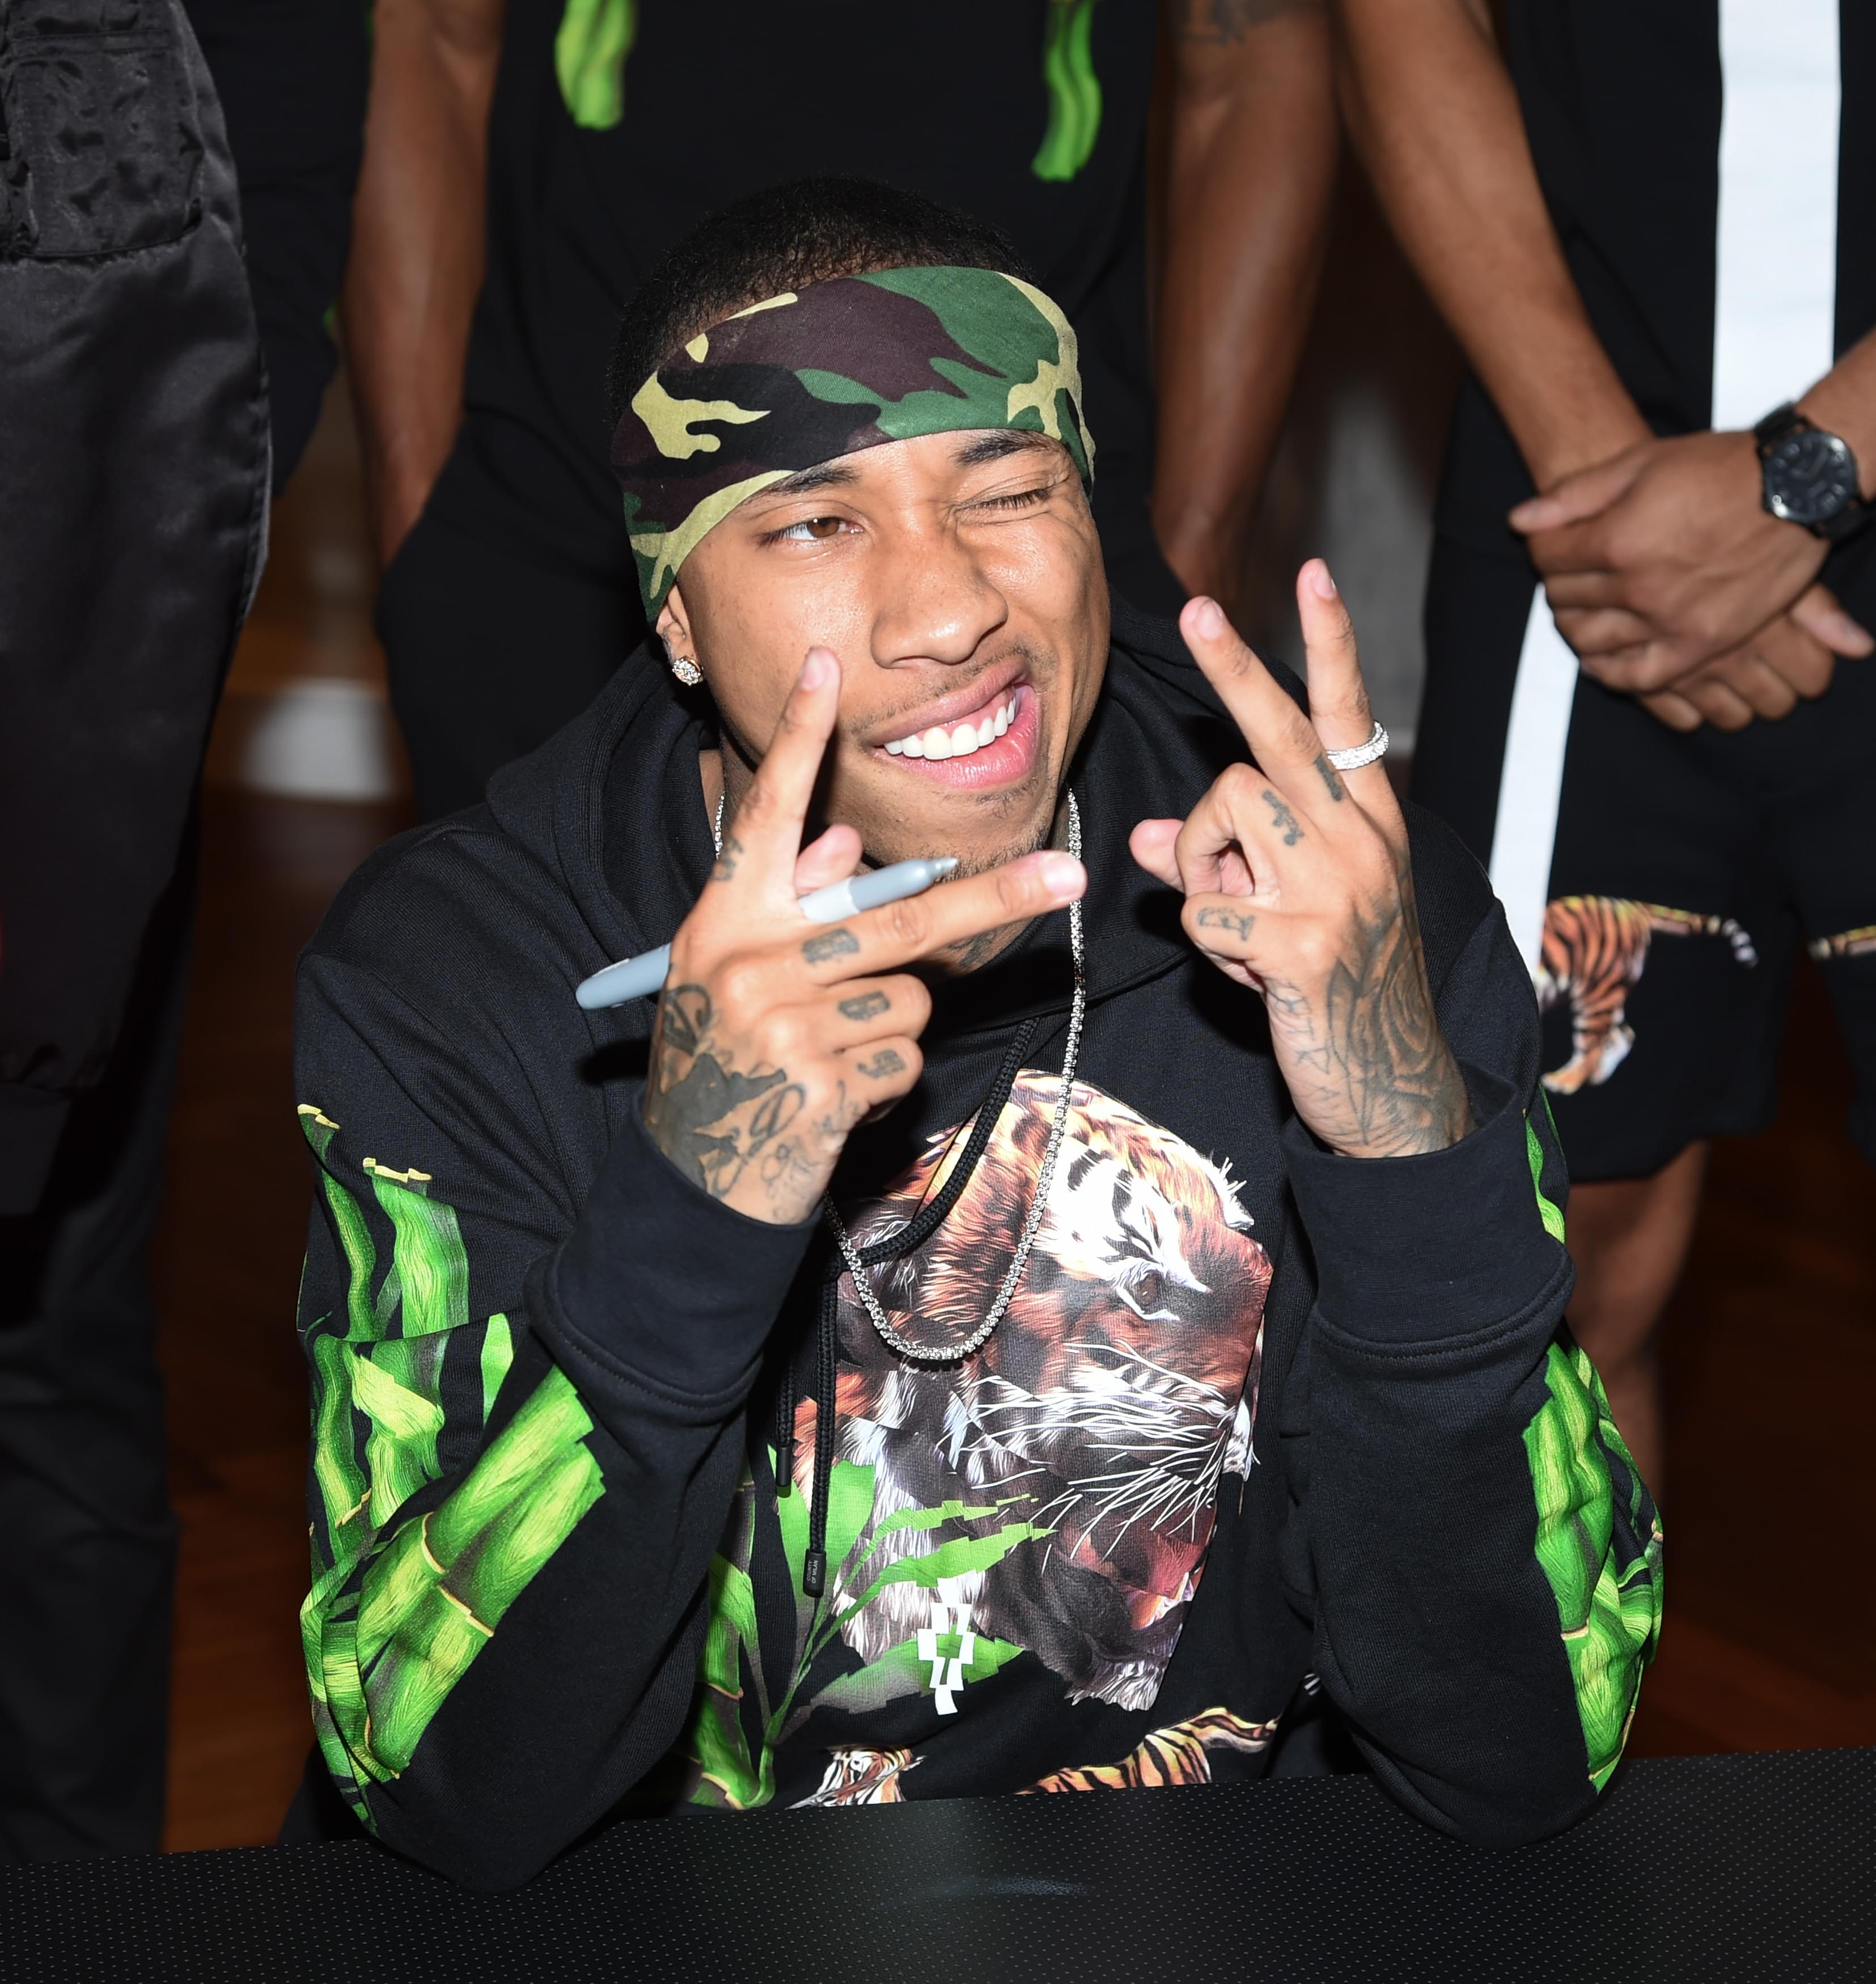 Tyga Shares Photo of A Grill He Gifted To His 4-Year-Old Son